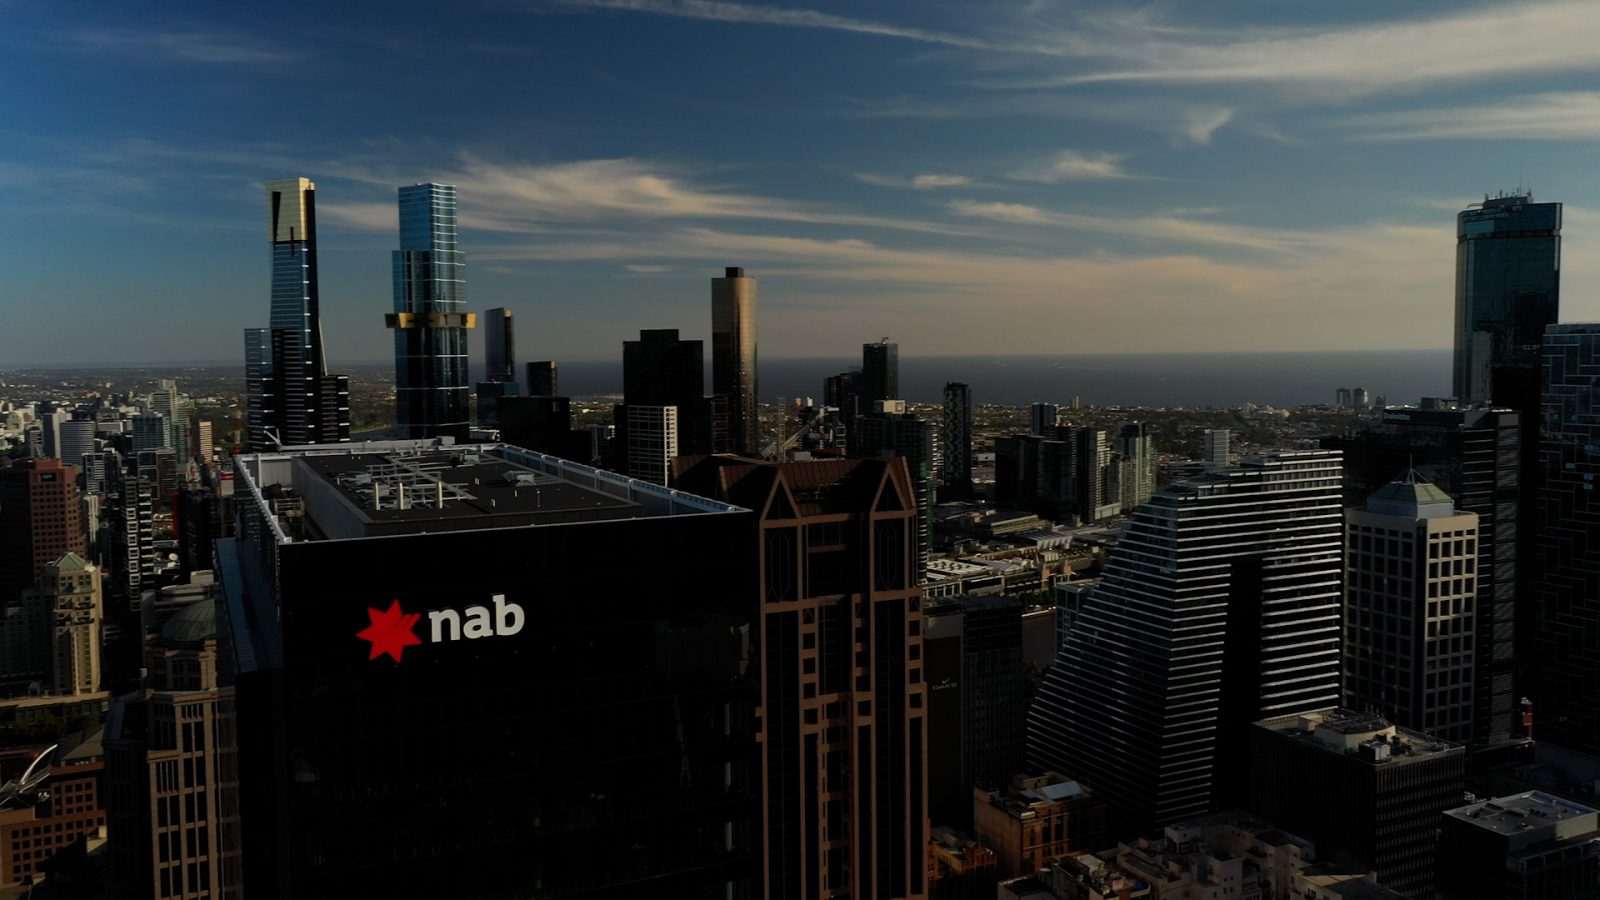 An aerial view displaying the NAB Melbourne building with the city skyline in the background, featuring other buildings.